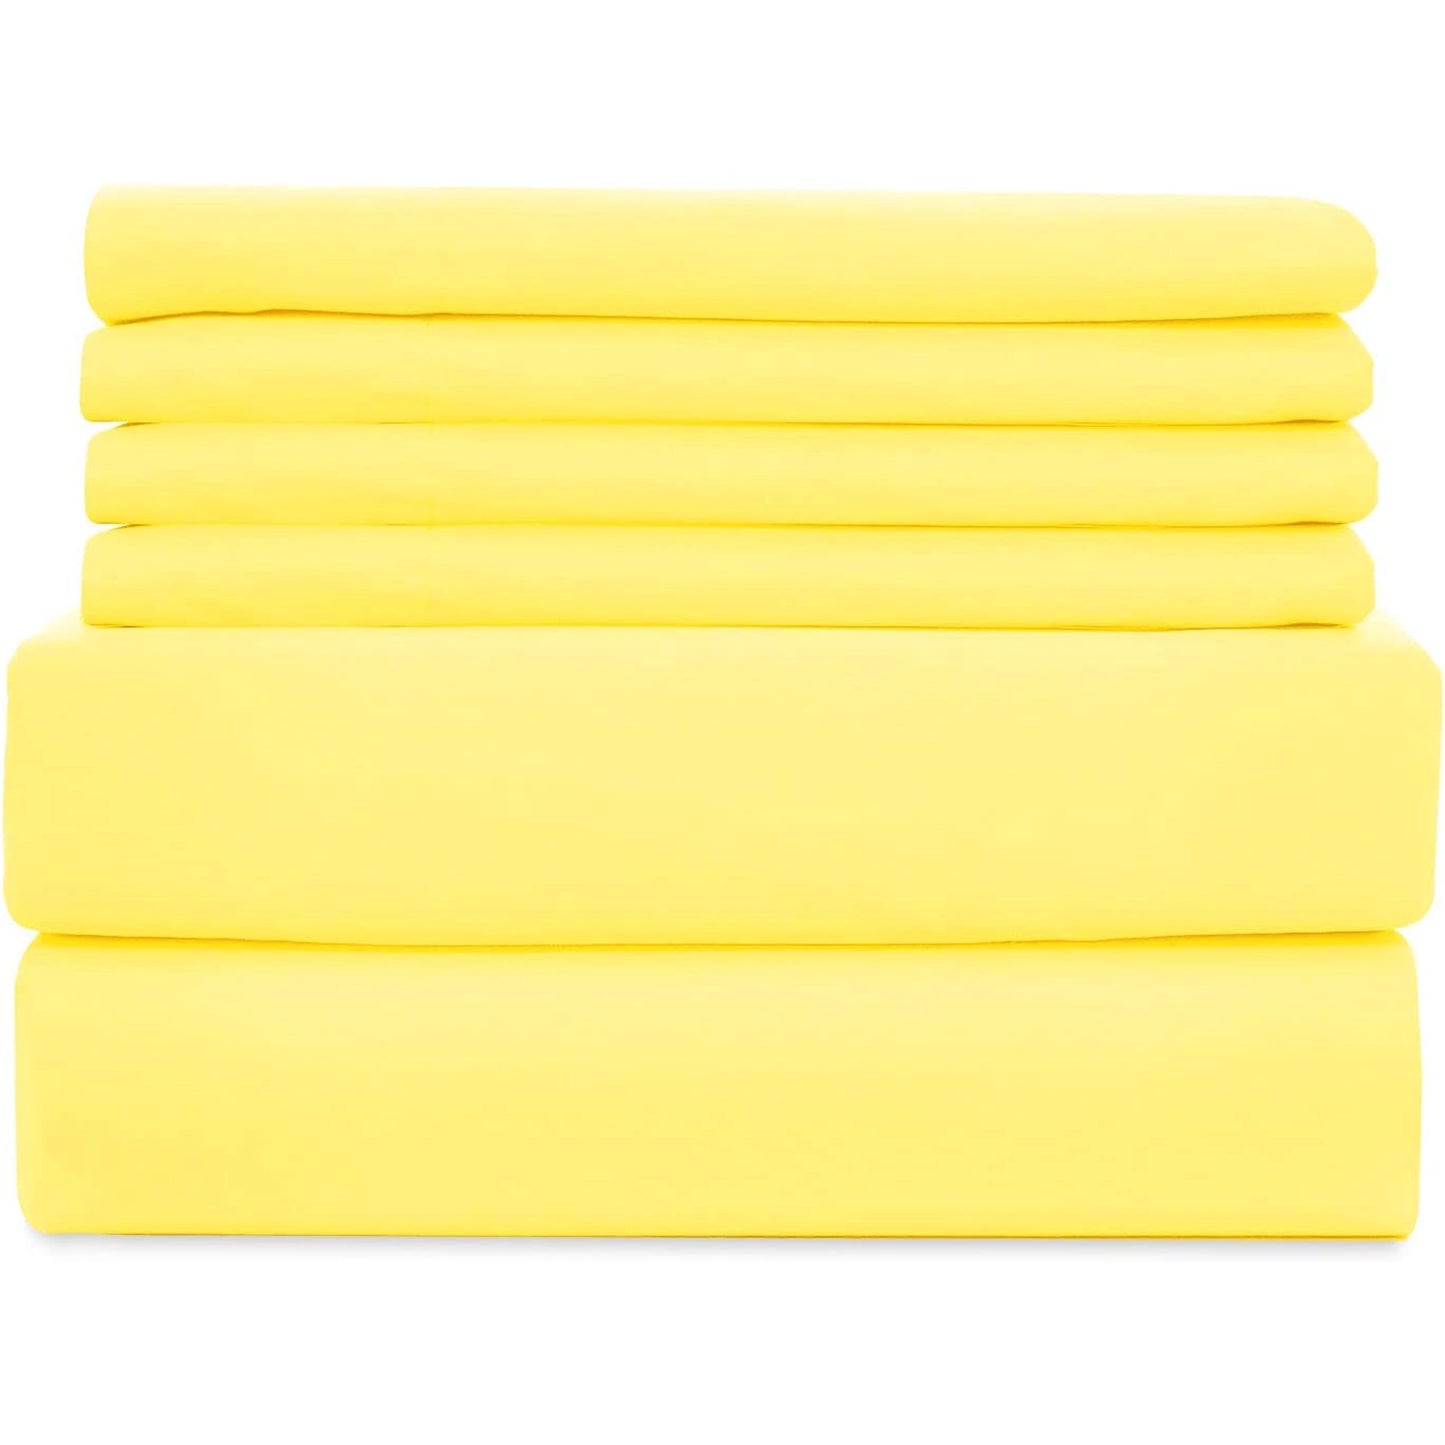 6 Inch Pocket 4Pc Sheet Set Yellow 100% Egyptian Cotton 1000 Thread Count